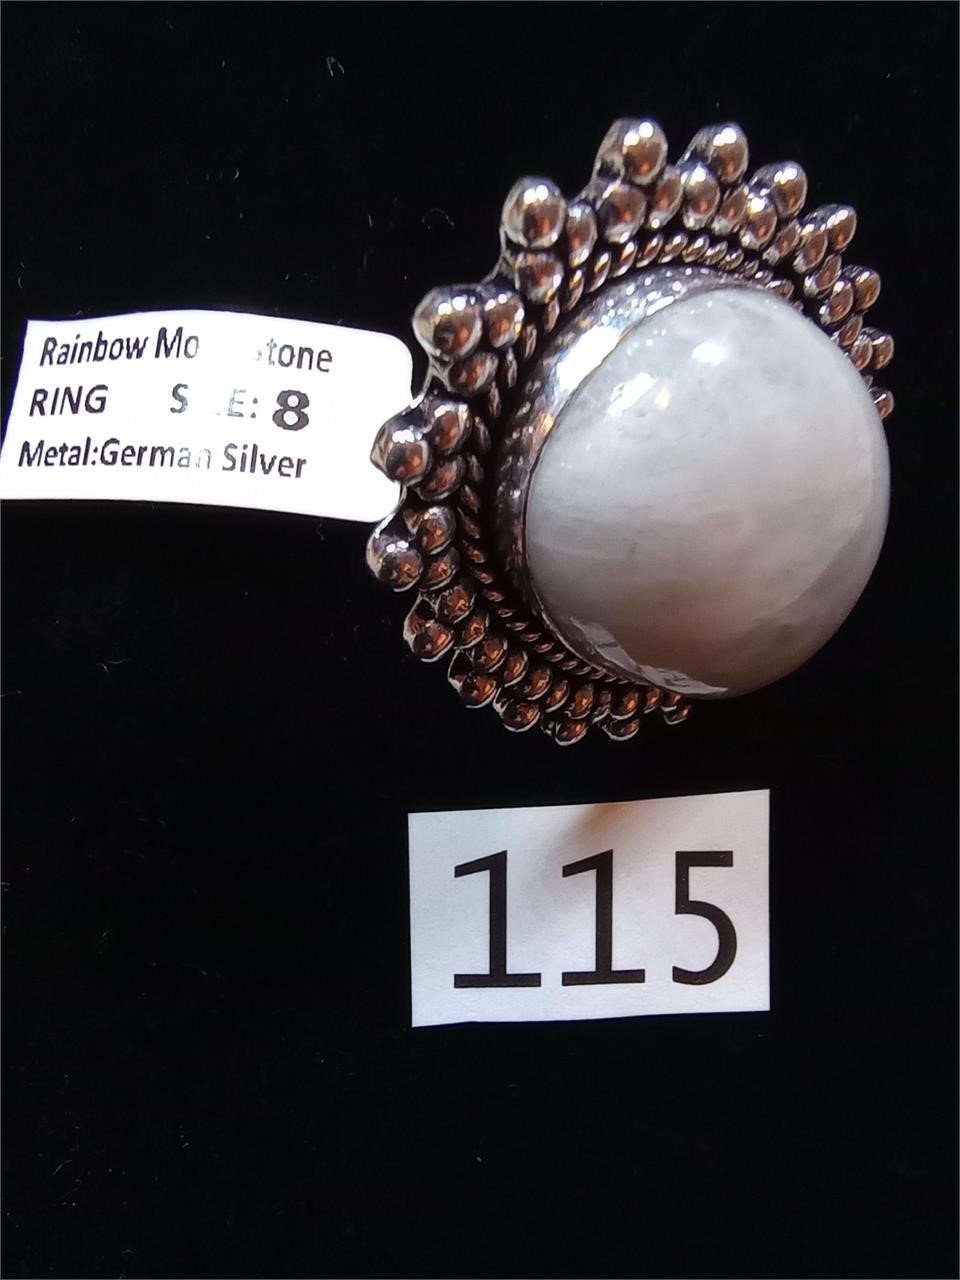 SILVER COINS AND JEWELRY  SEVEN DAY AUCTION